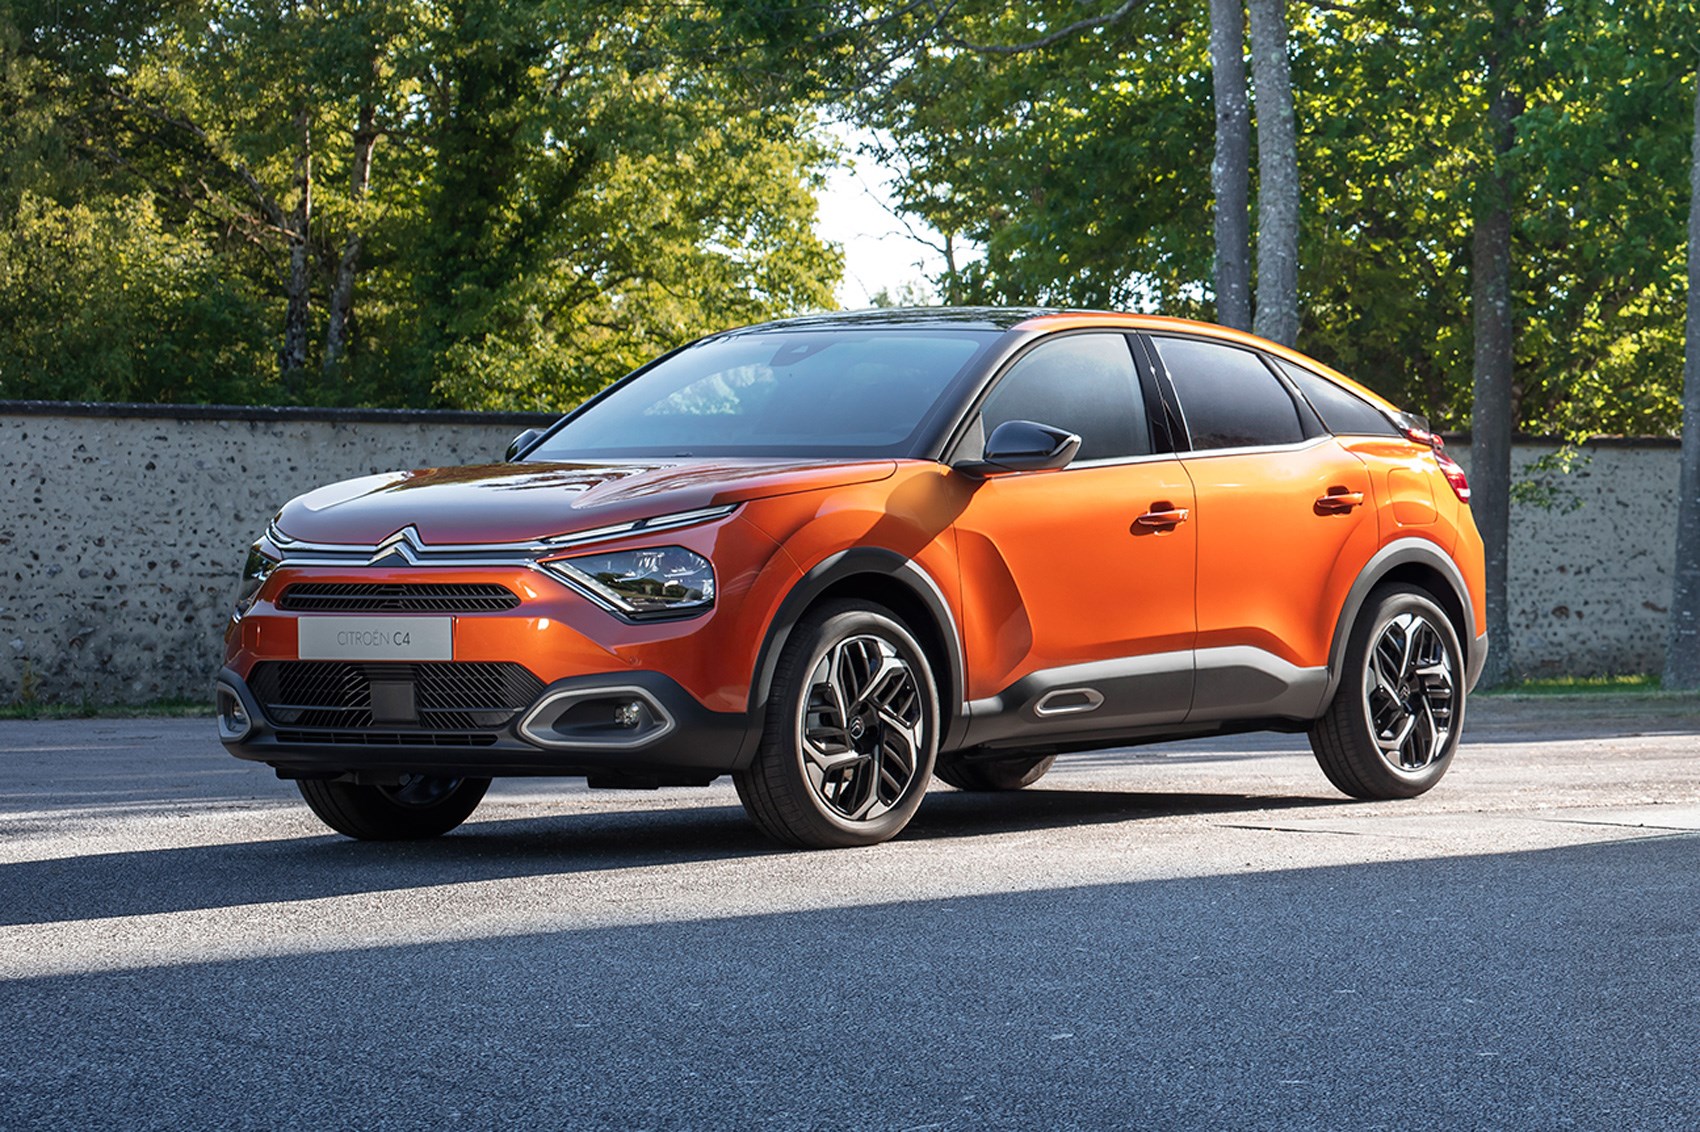 All-new Citroen C4 hatch: full details of Cactus replacement